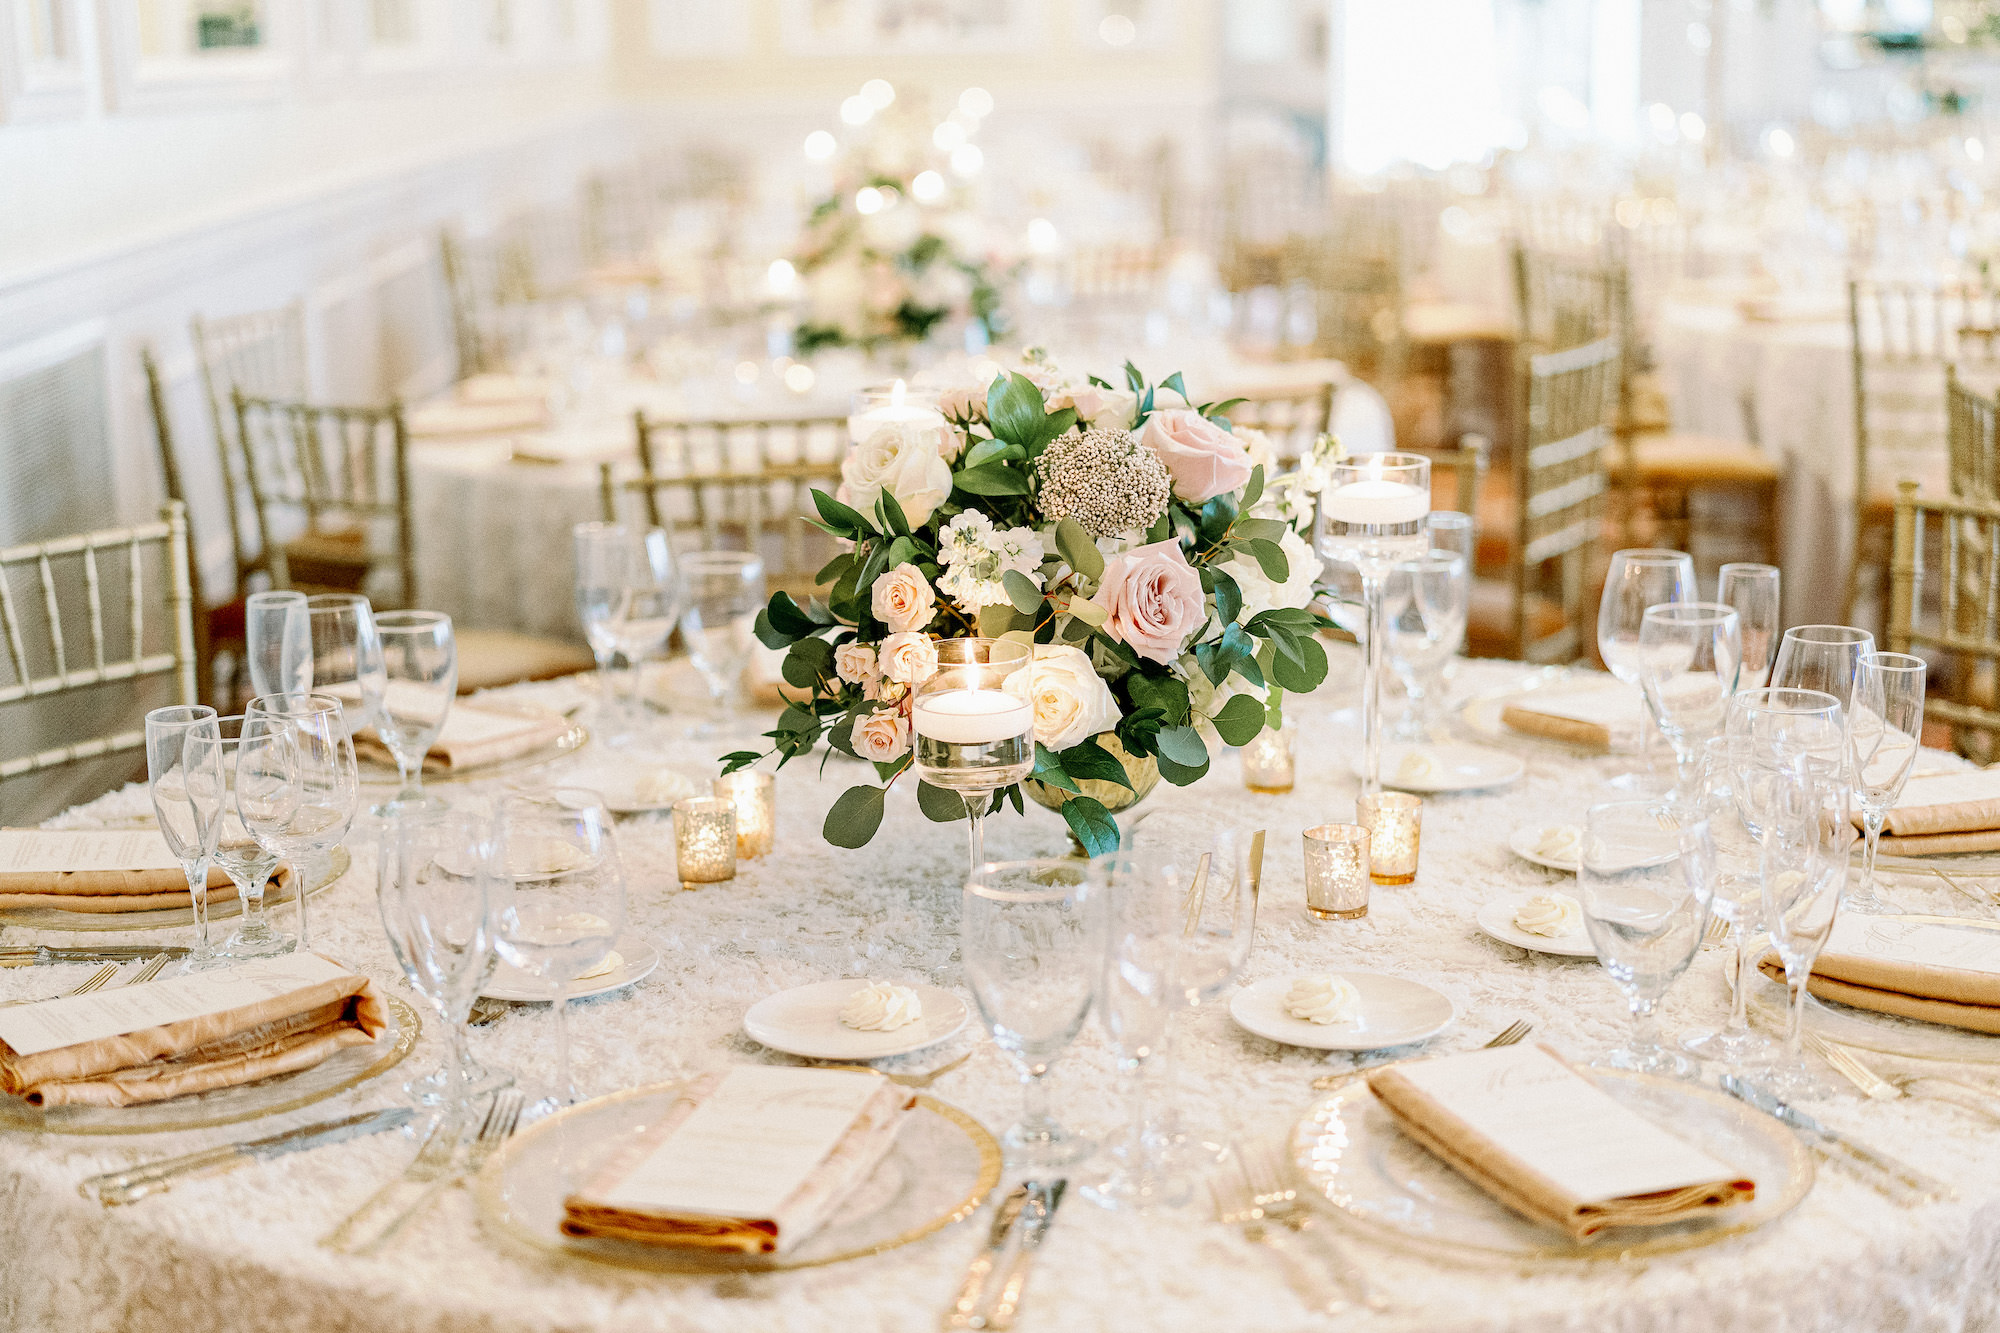 Rose, Carnation, and Eucalyptus Centerpiece Ideas | Gold Champagne Table Linen | Tampa Bay Florist Monarch Events and Design | A Chair Affair | Kate Ryan Event Rentals | Over the Top Linen Rentals